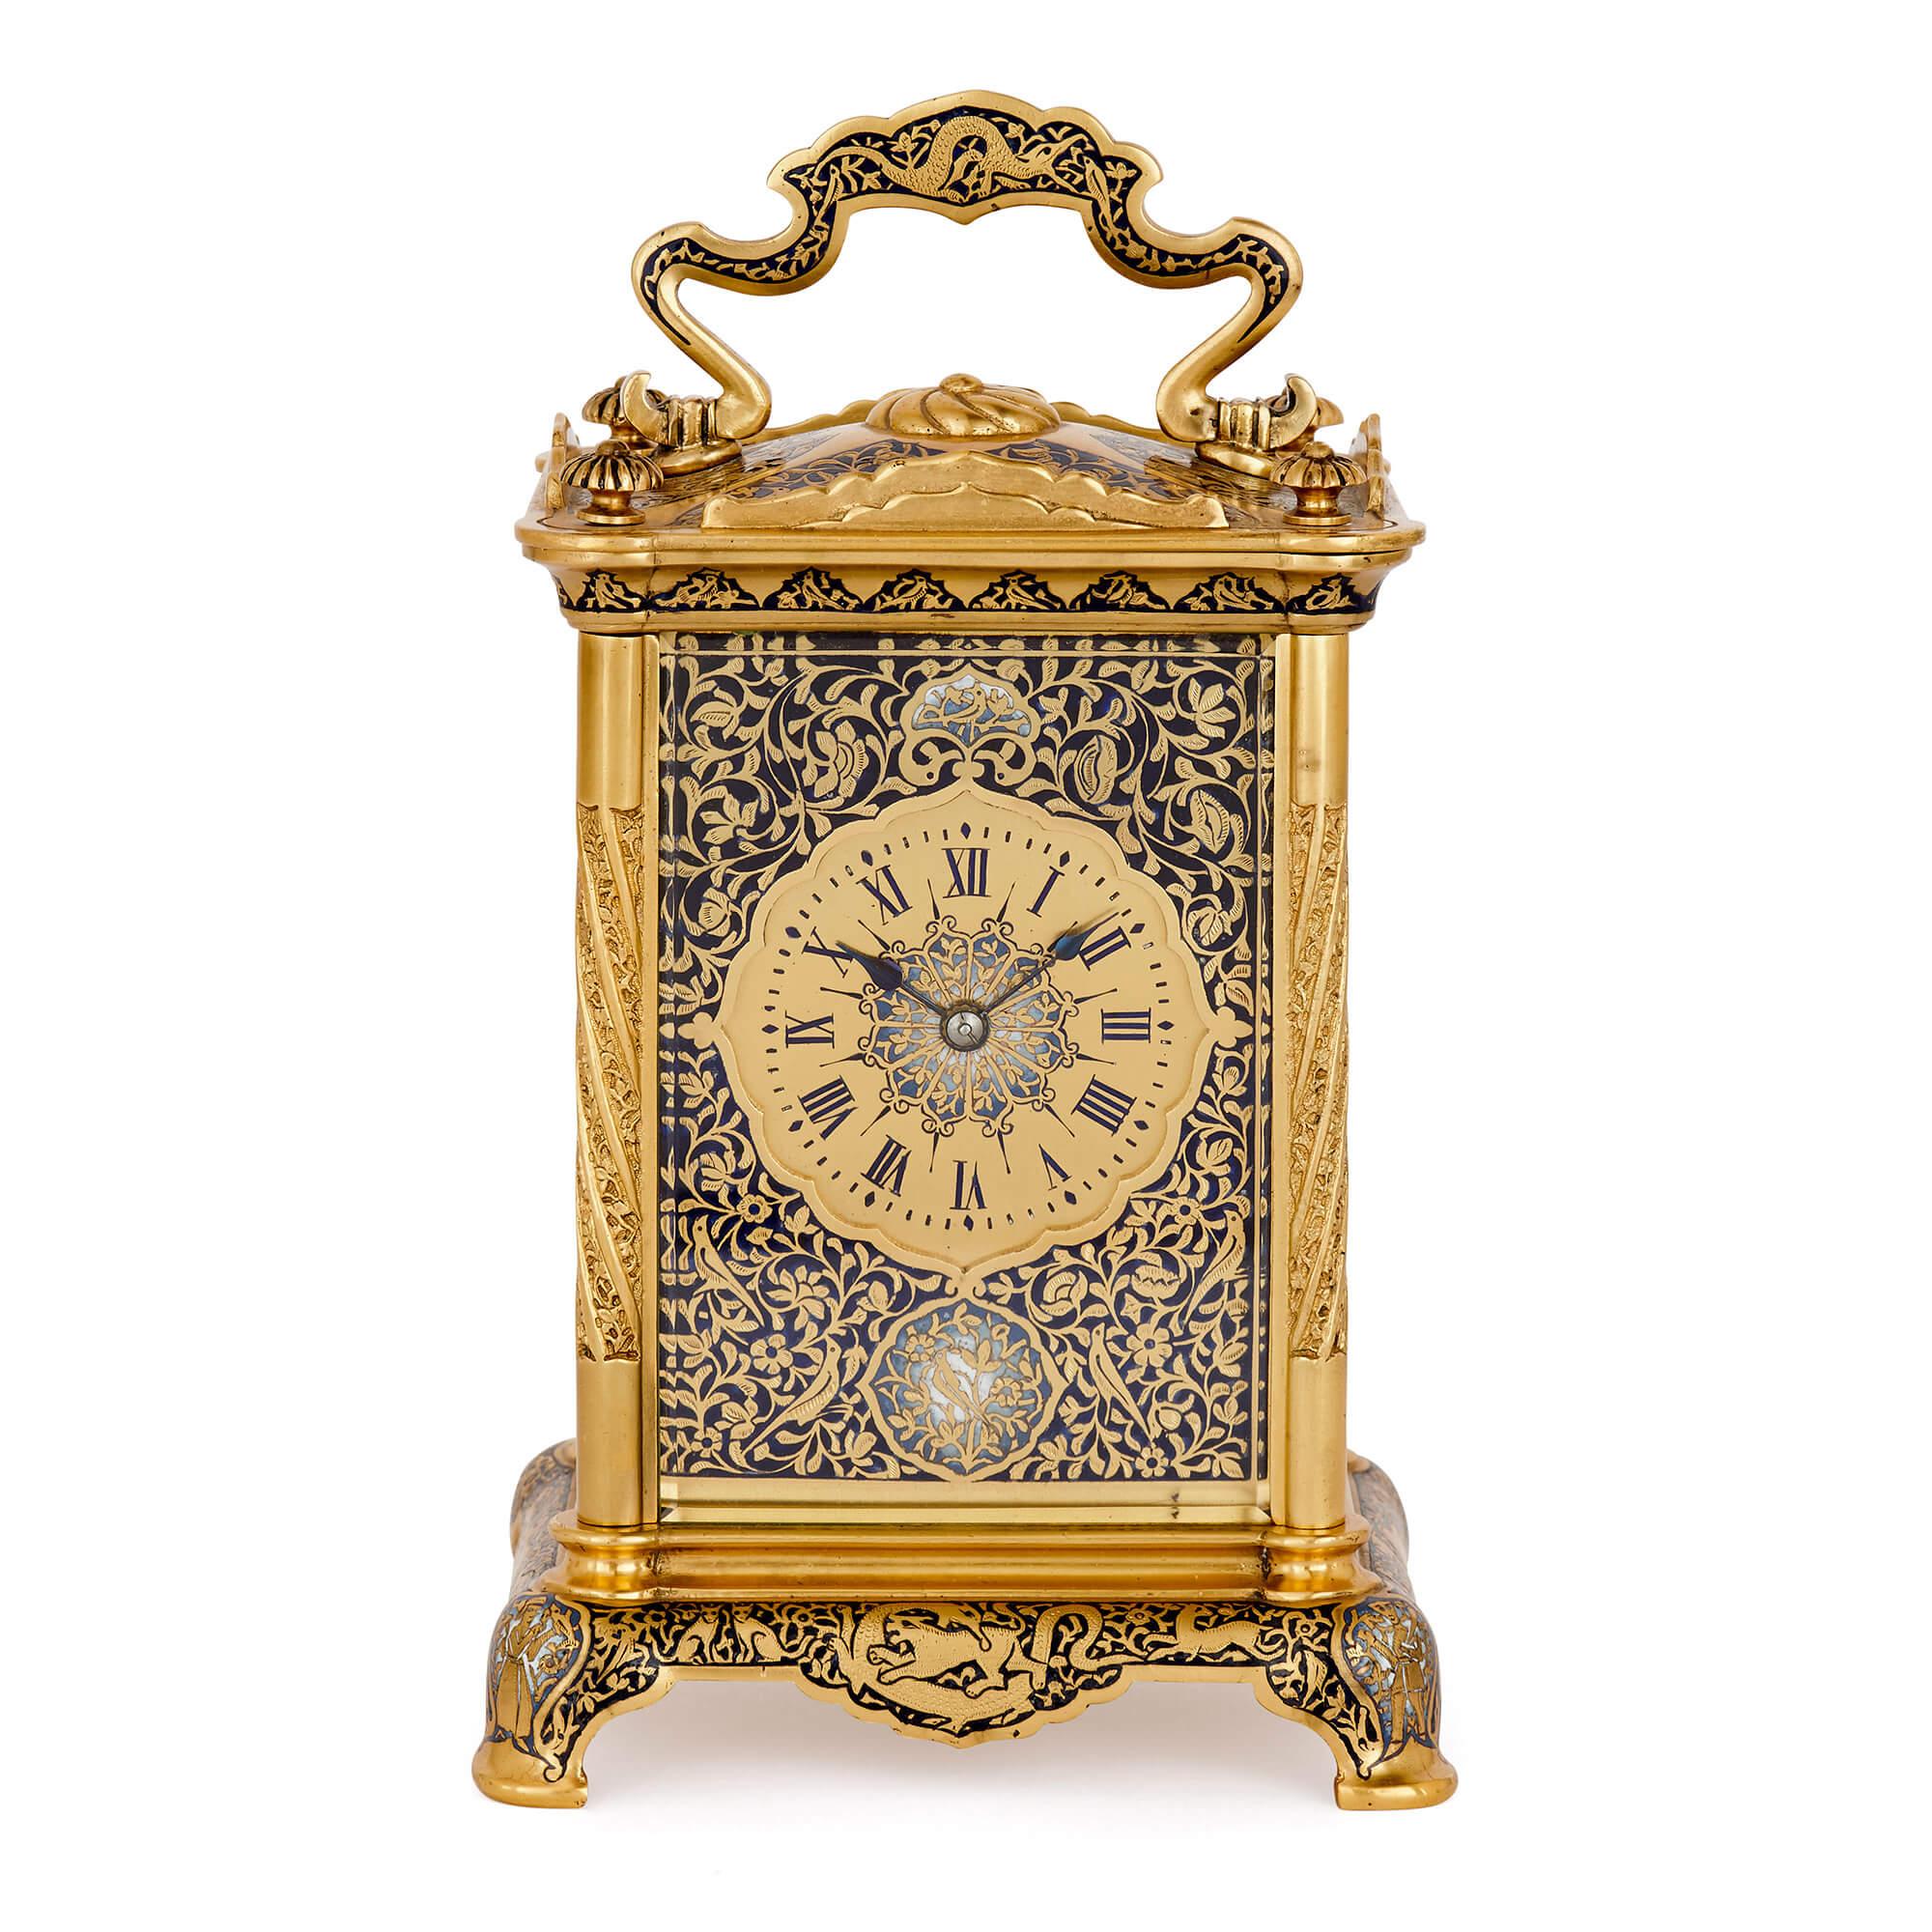 The contrast between rich blue enamel, in light and dark hues, and bright gilt bronze gives this carriage clock a sumptuous, luxurious feel. With a timeless design, the clock could be used within a traditional or modern design scheme. Equally it